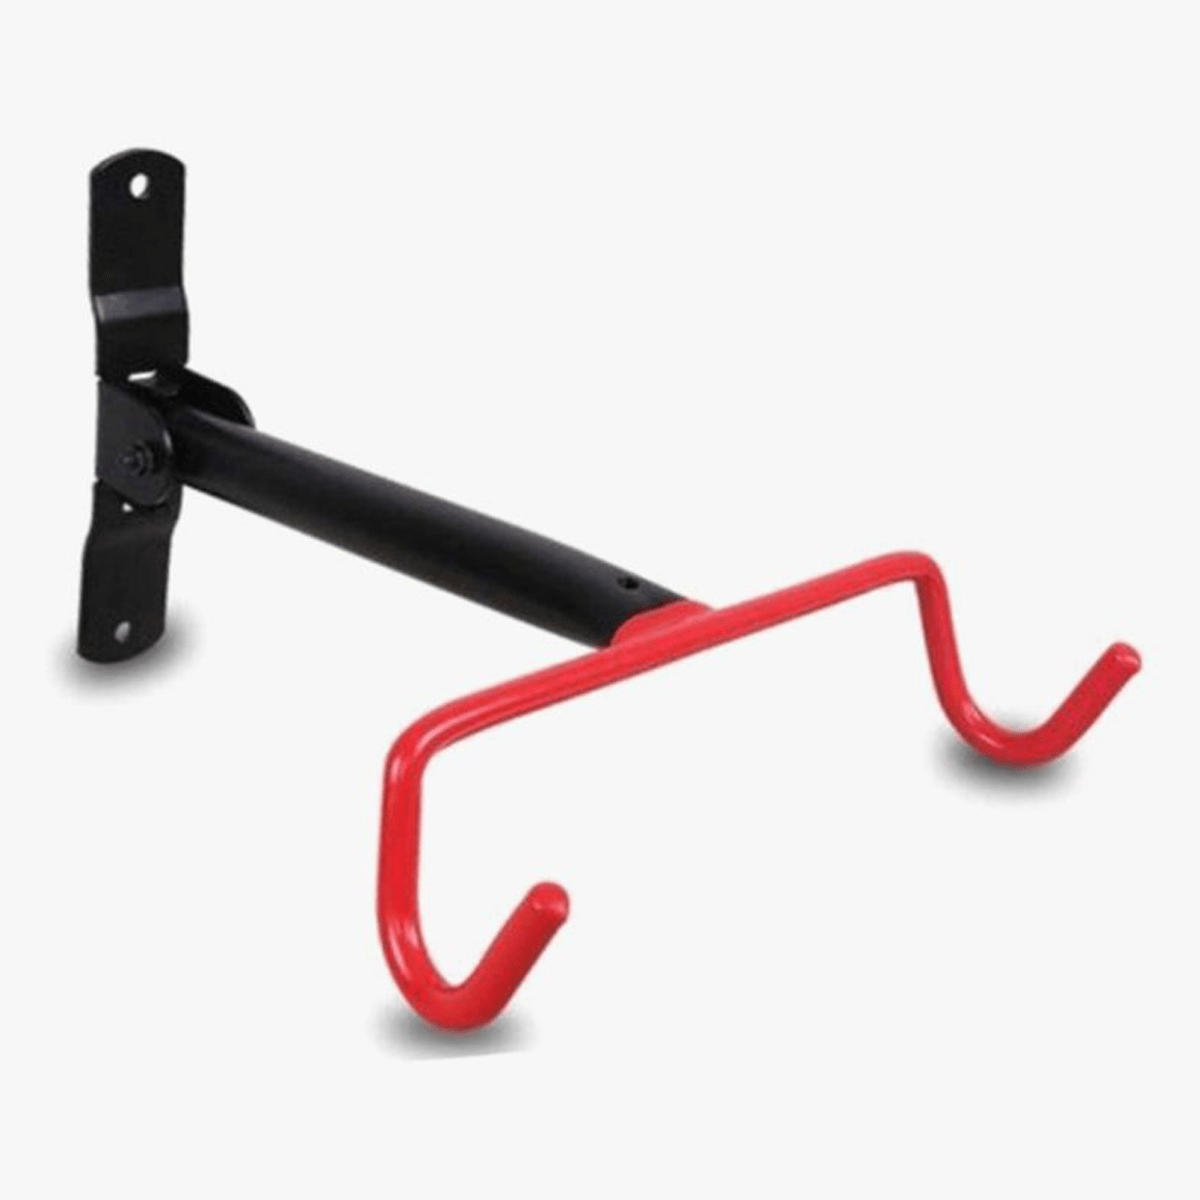 Wall Mount Hook Holder For Bicycle - VLRA